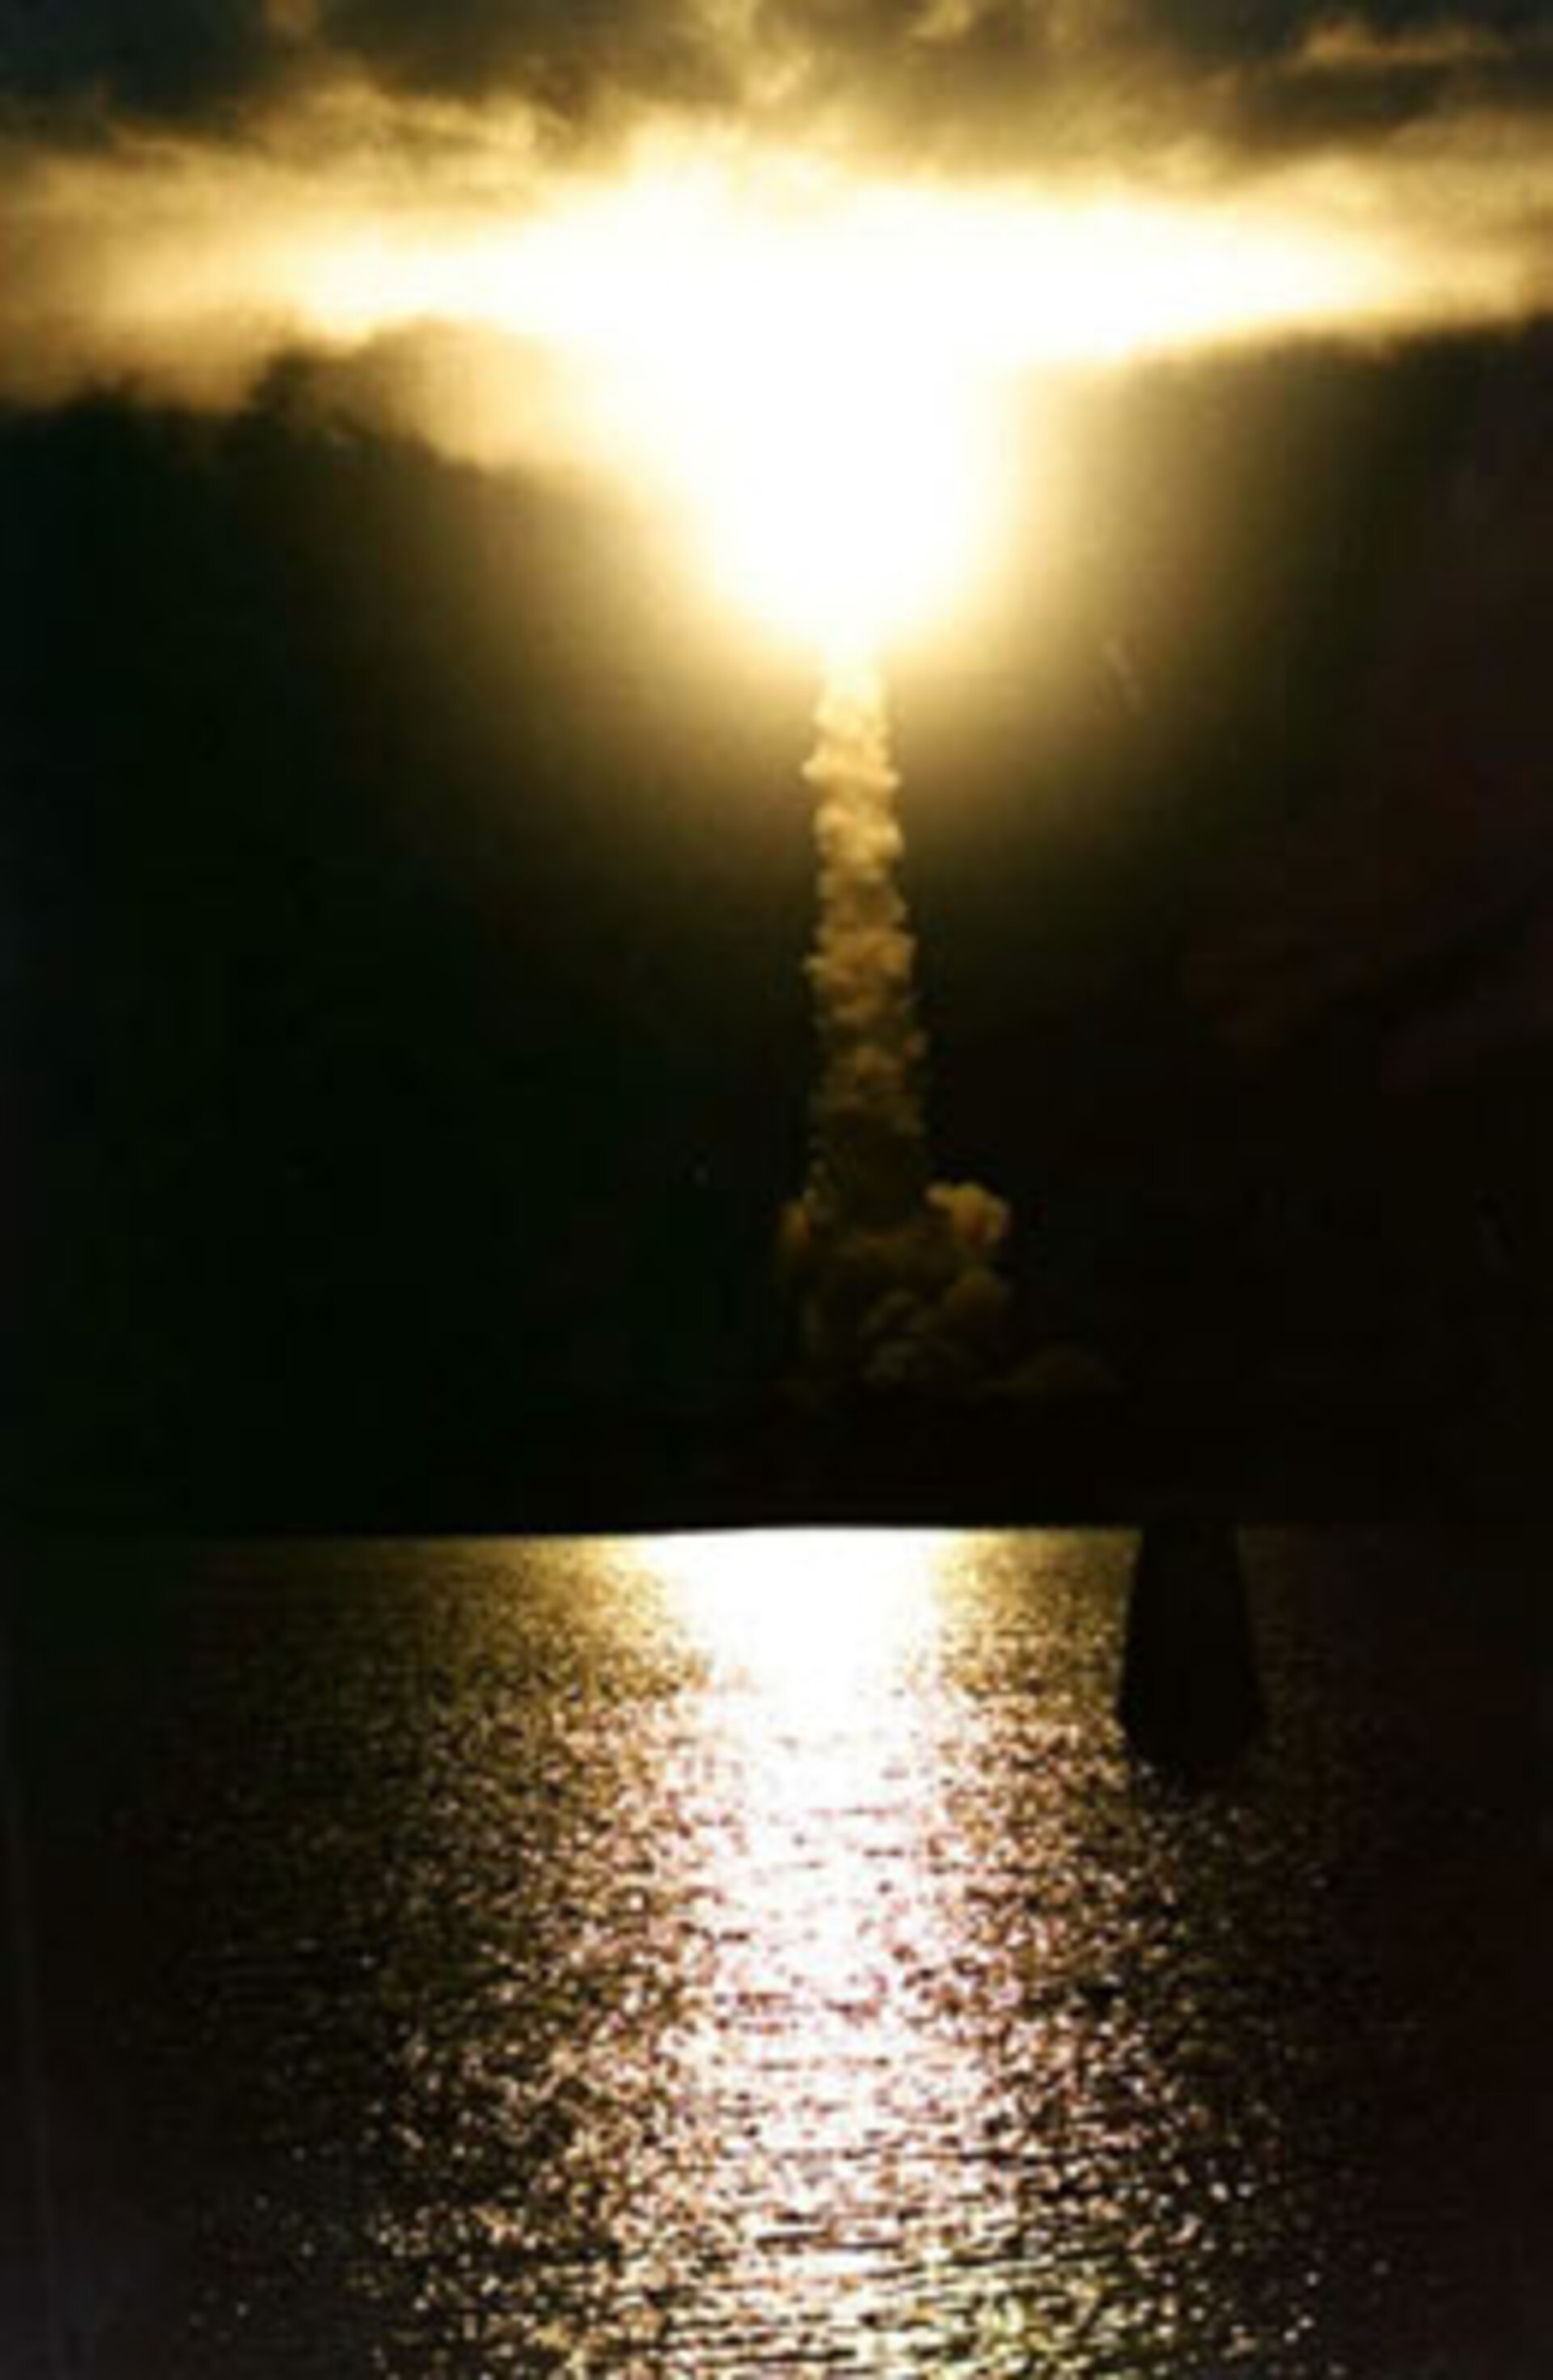 Titan IVB with Cassini-Huygens on board blasts off from Cape Canaveral